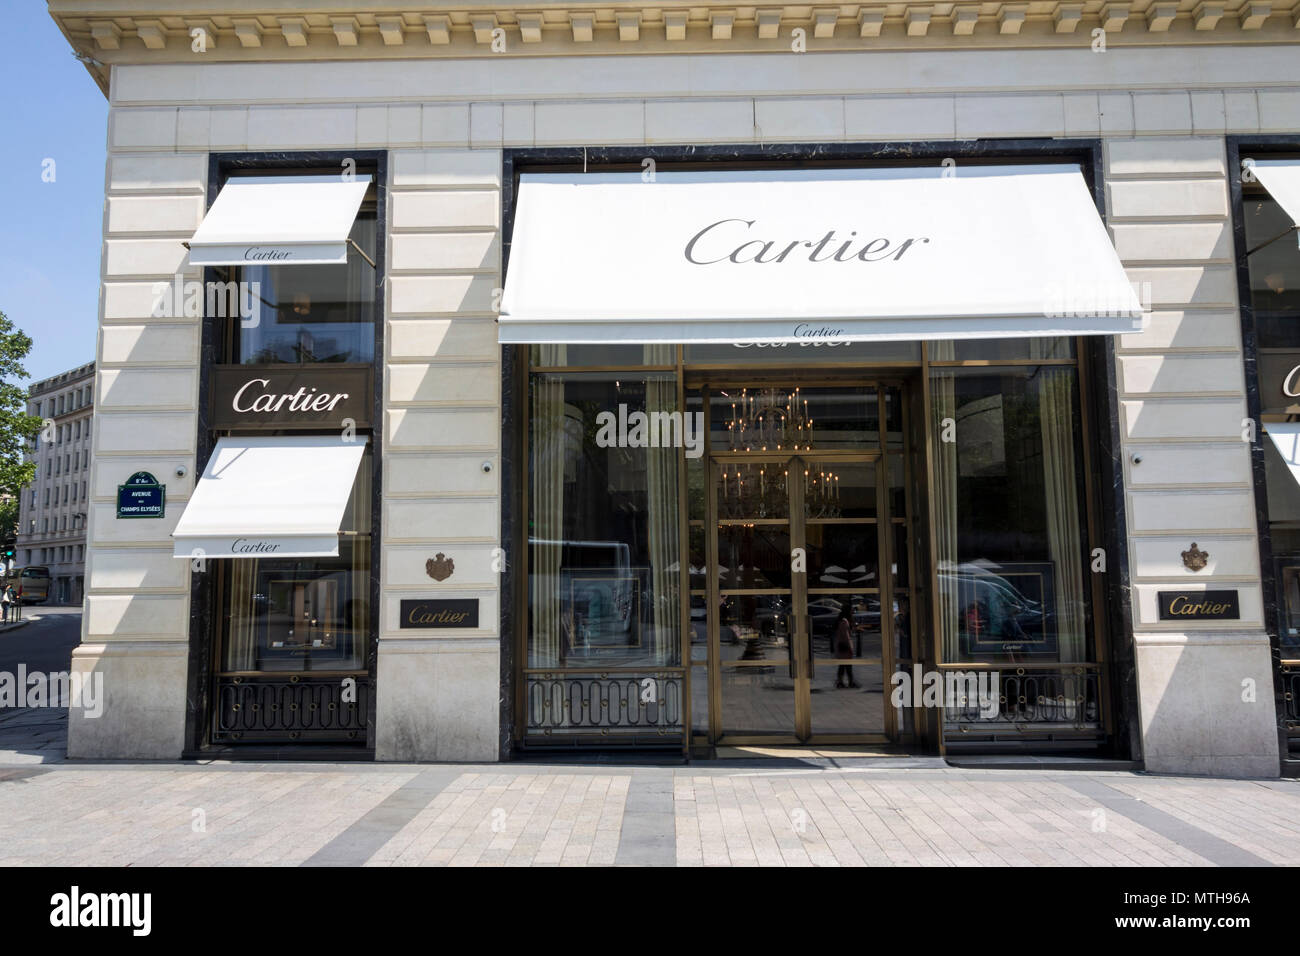 cartier store locations in nj